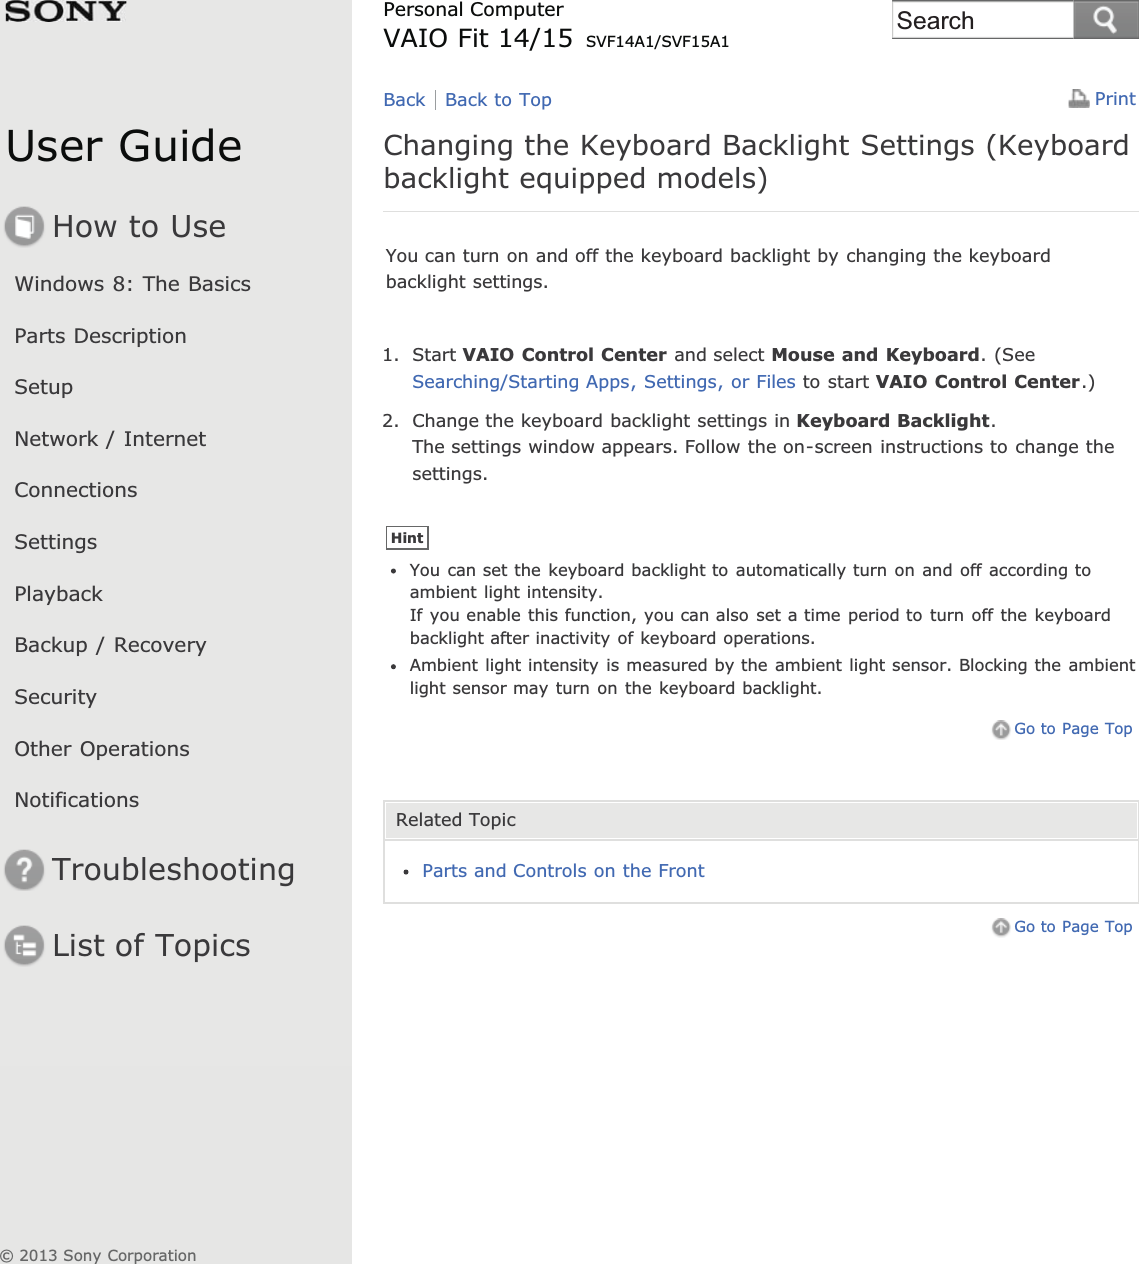 User GuideHow to UseWindows 8: The BasicsParts DescriptionSetupNetwork / InternetConnectionsSettingsPlaybackBackup / RecoverySecurityOther OperationsNotificationsTroubleshootingList of TopicsPrintPersonal ComputerVAIO Fit 14/15 SVF14A1/SVF15A1Changing the Keyboard Backlight Settings (Keyboardbacklight equipped models)You can turn on and off the keyboard backlight by changing the keyboardbacklight settings.1. Start VAIO Control Center and select Mouse and Keyboard. (SeeSearching/Starting Apps, Settings, or Files to start VAIO Control Center.)2. Change the keyboard backlight settings in Keyboard Backlight.The settings window appears. Follow the on-screen instructions to change thesettings.HintYou can set the keyboard backlight to automatically turn on and off according toambient light intensity.If you enable this function, you can also set a time period to turn off the keyboardbacklight after inactivity of keyboard operations.Ambient light intensity is measured by the ambient light sensor. Blocking the ambientlight sensor may turn on the keyboard backlight.Go to Page TopRelated TopicParts and Controls on the FrontGo to Page TopBack Back to Top© 2013 Sony CorporationSearch